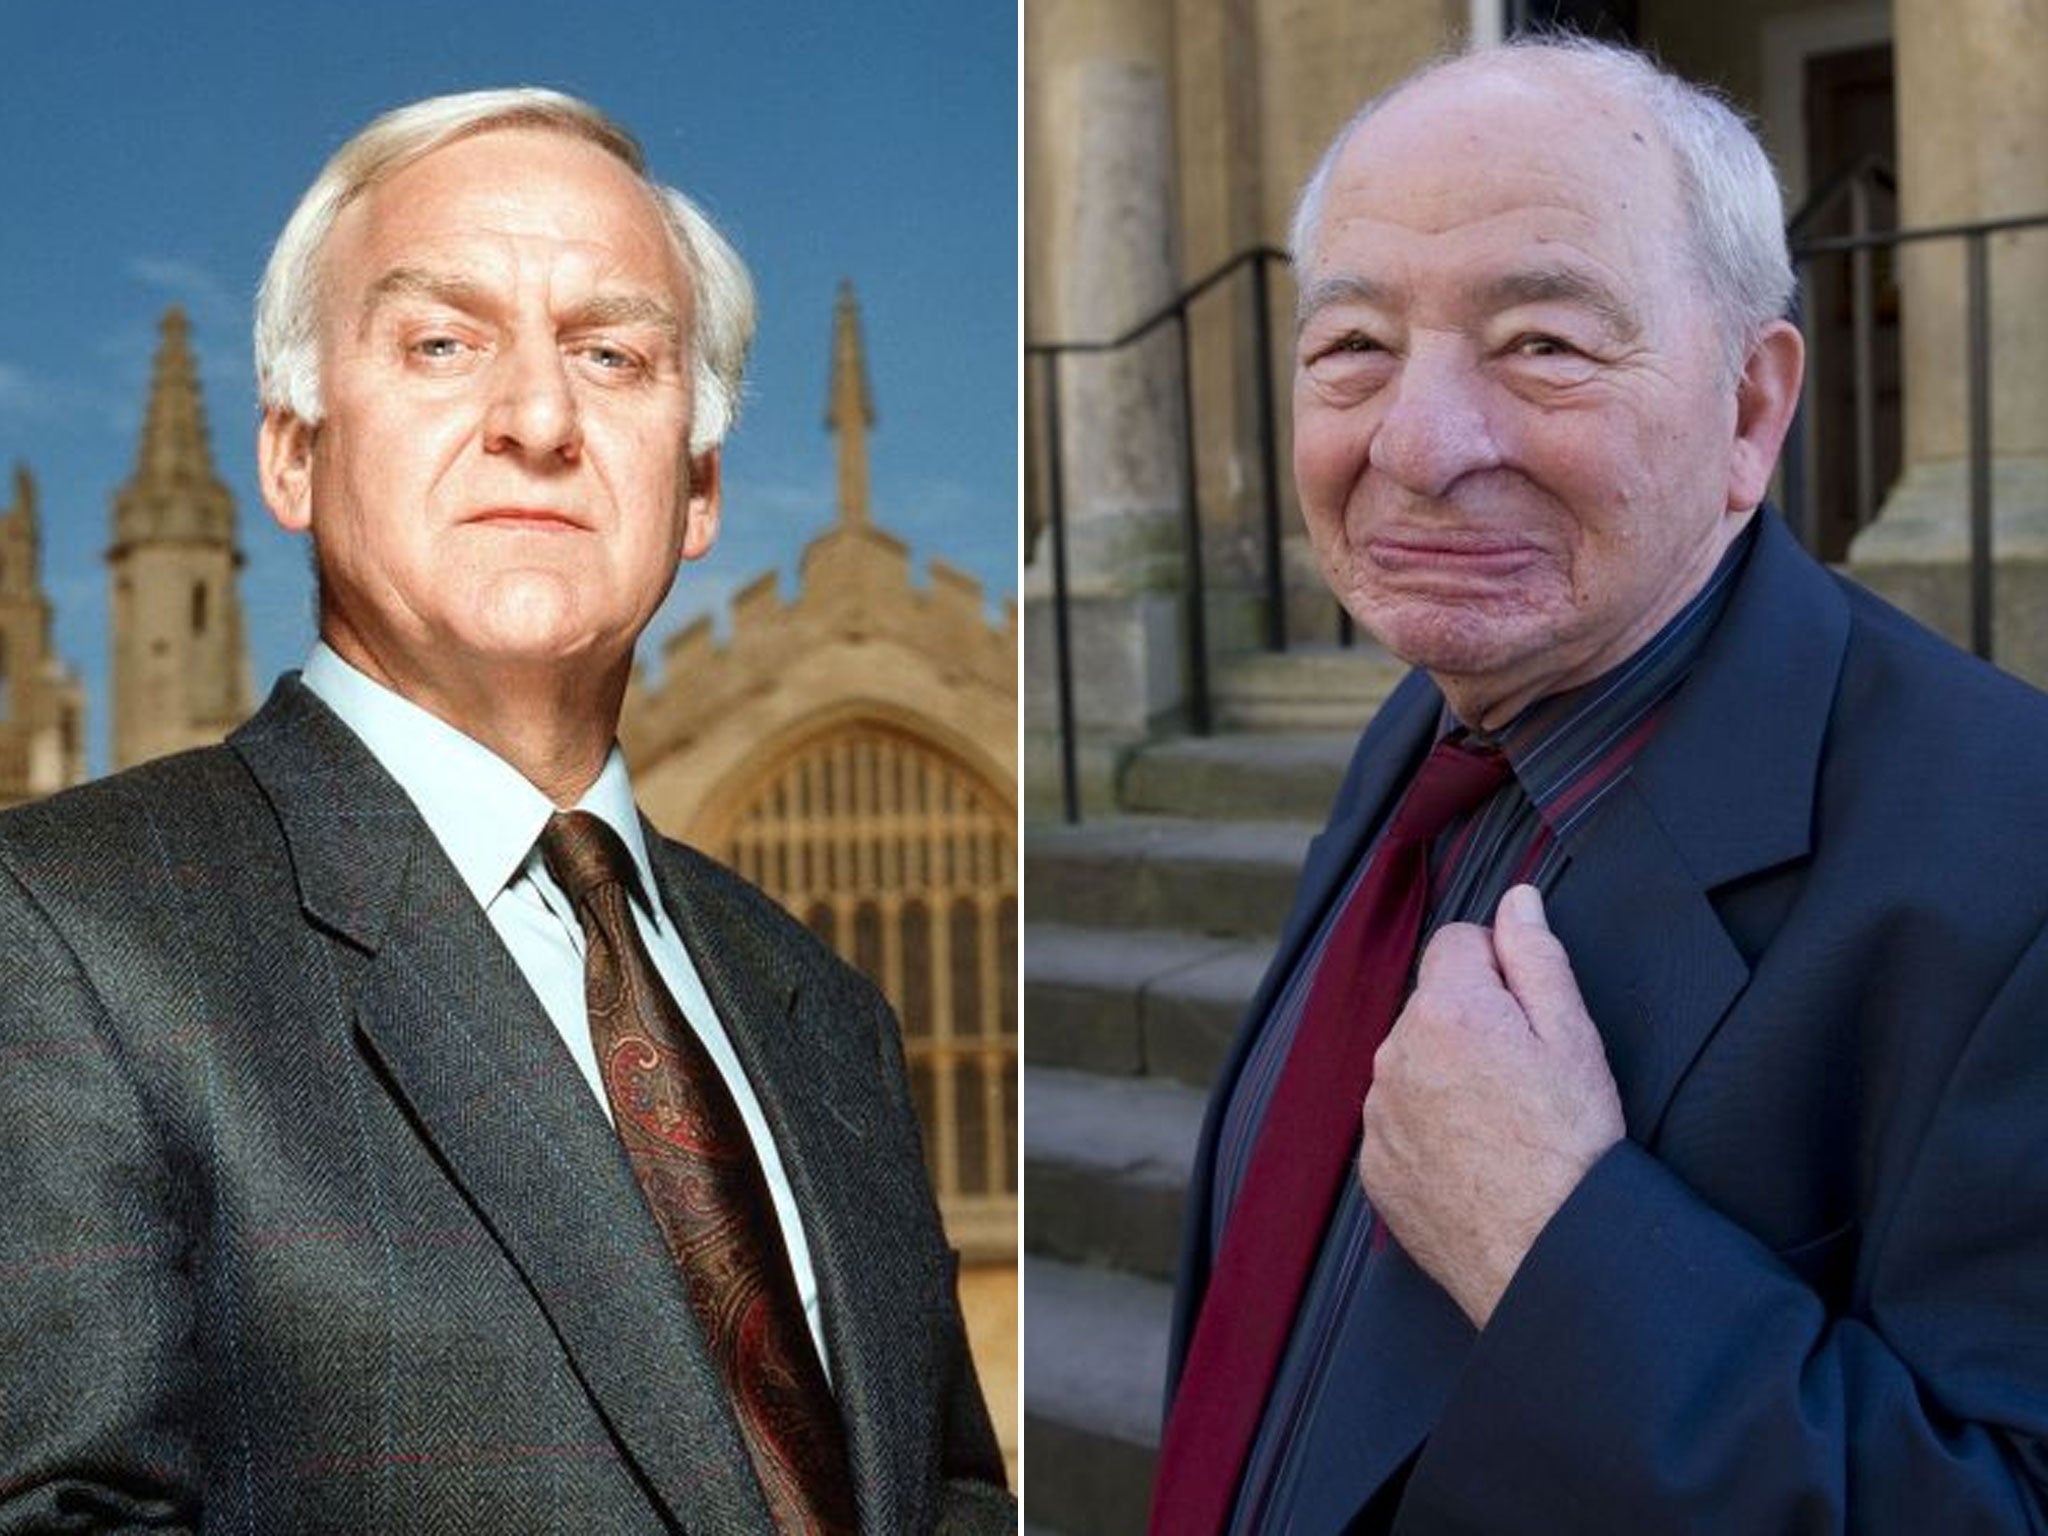 Author Colin Dexter (right) has ensured no other actor can play the role made popular by John Thaw (left) once ‘Endeavour’ ends